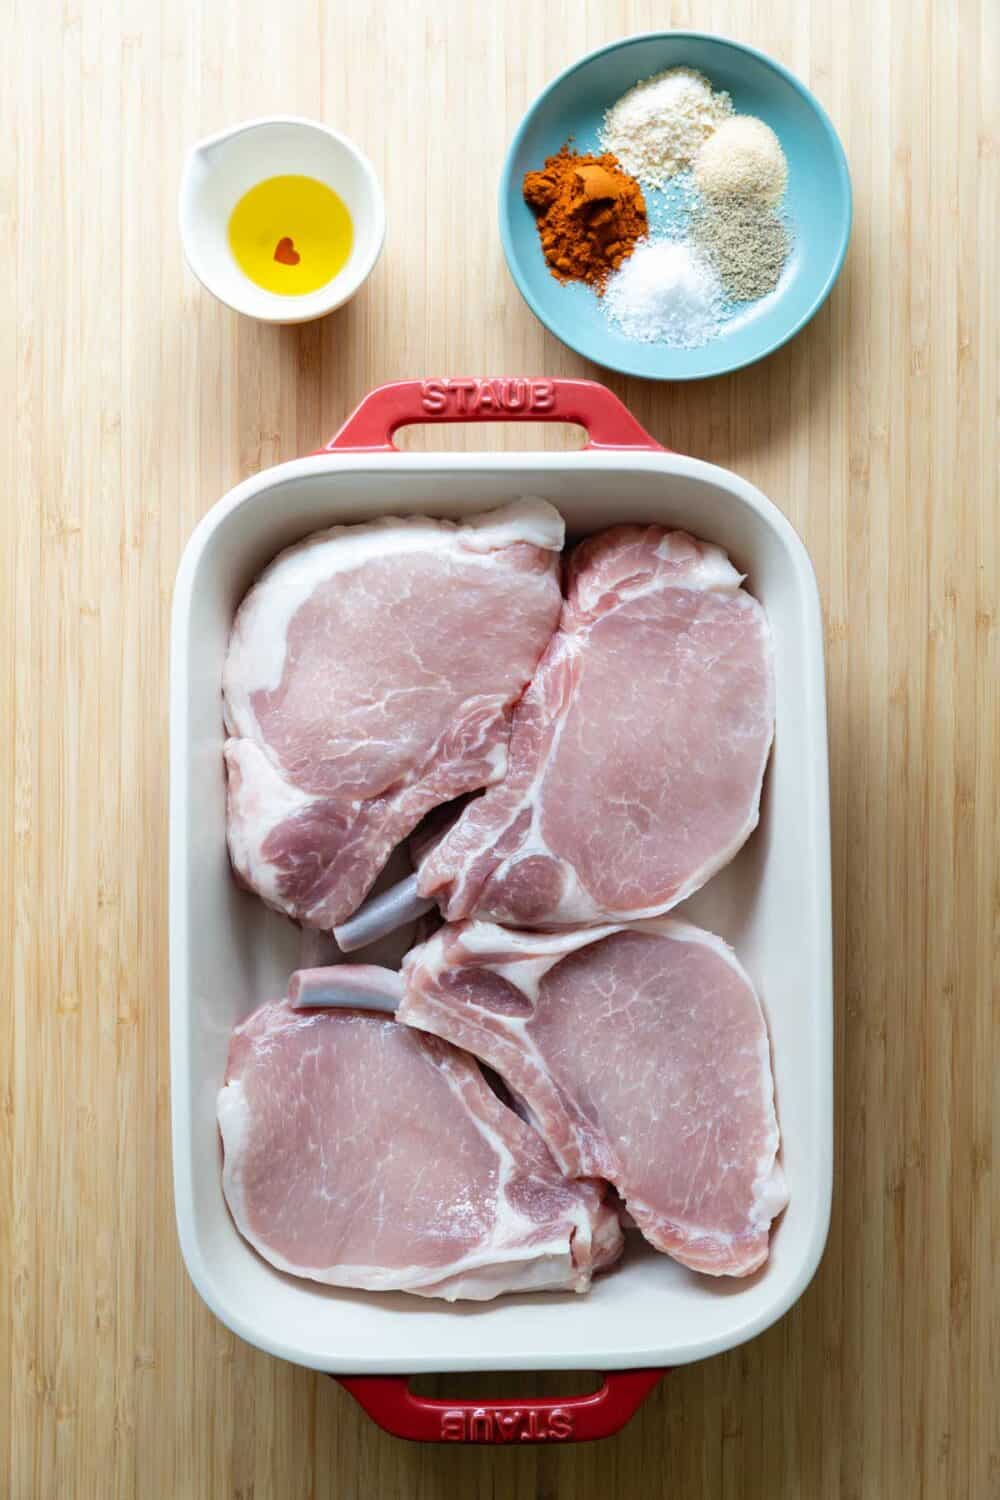 Pork chops in a baking dish, oil in a bowl, and spices on a plate laid out on a kitchen counter.